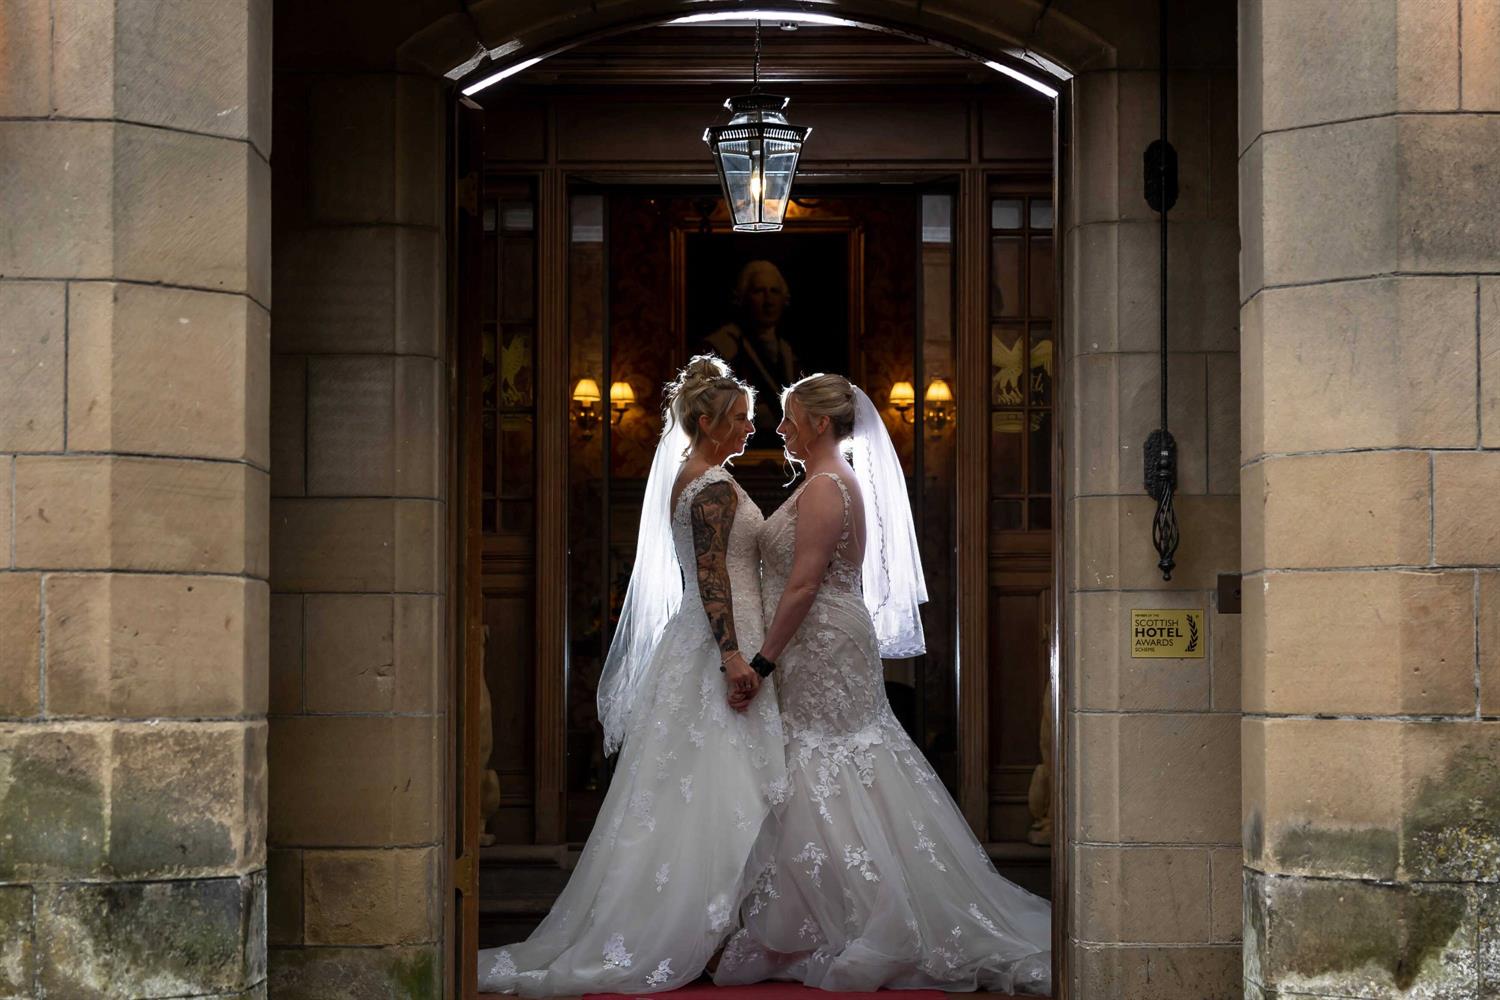 Two brides in the castle's entrance